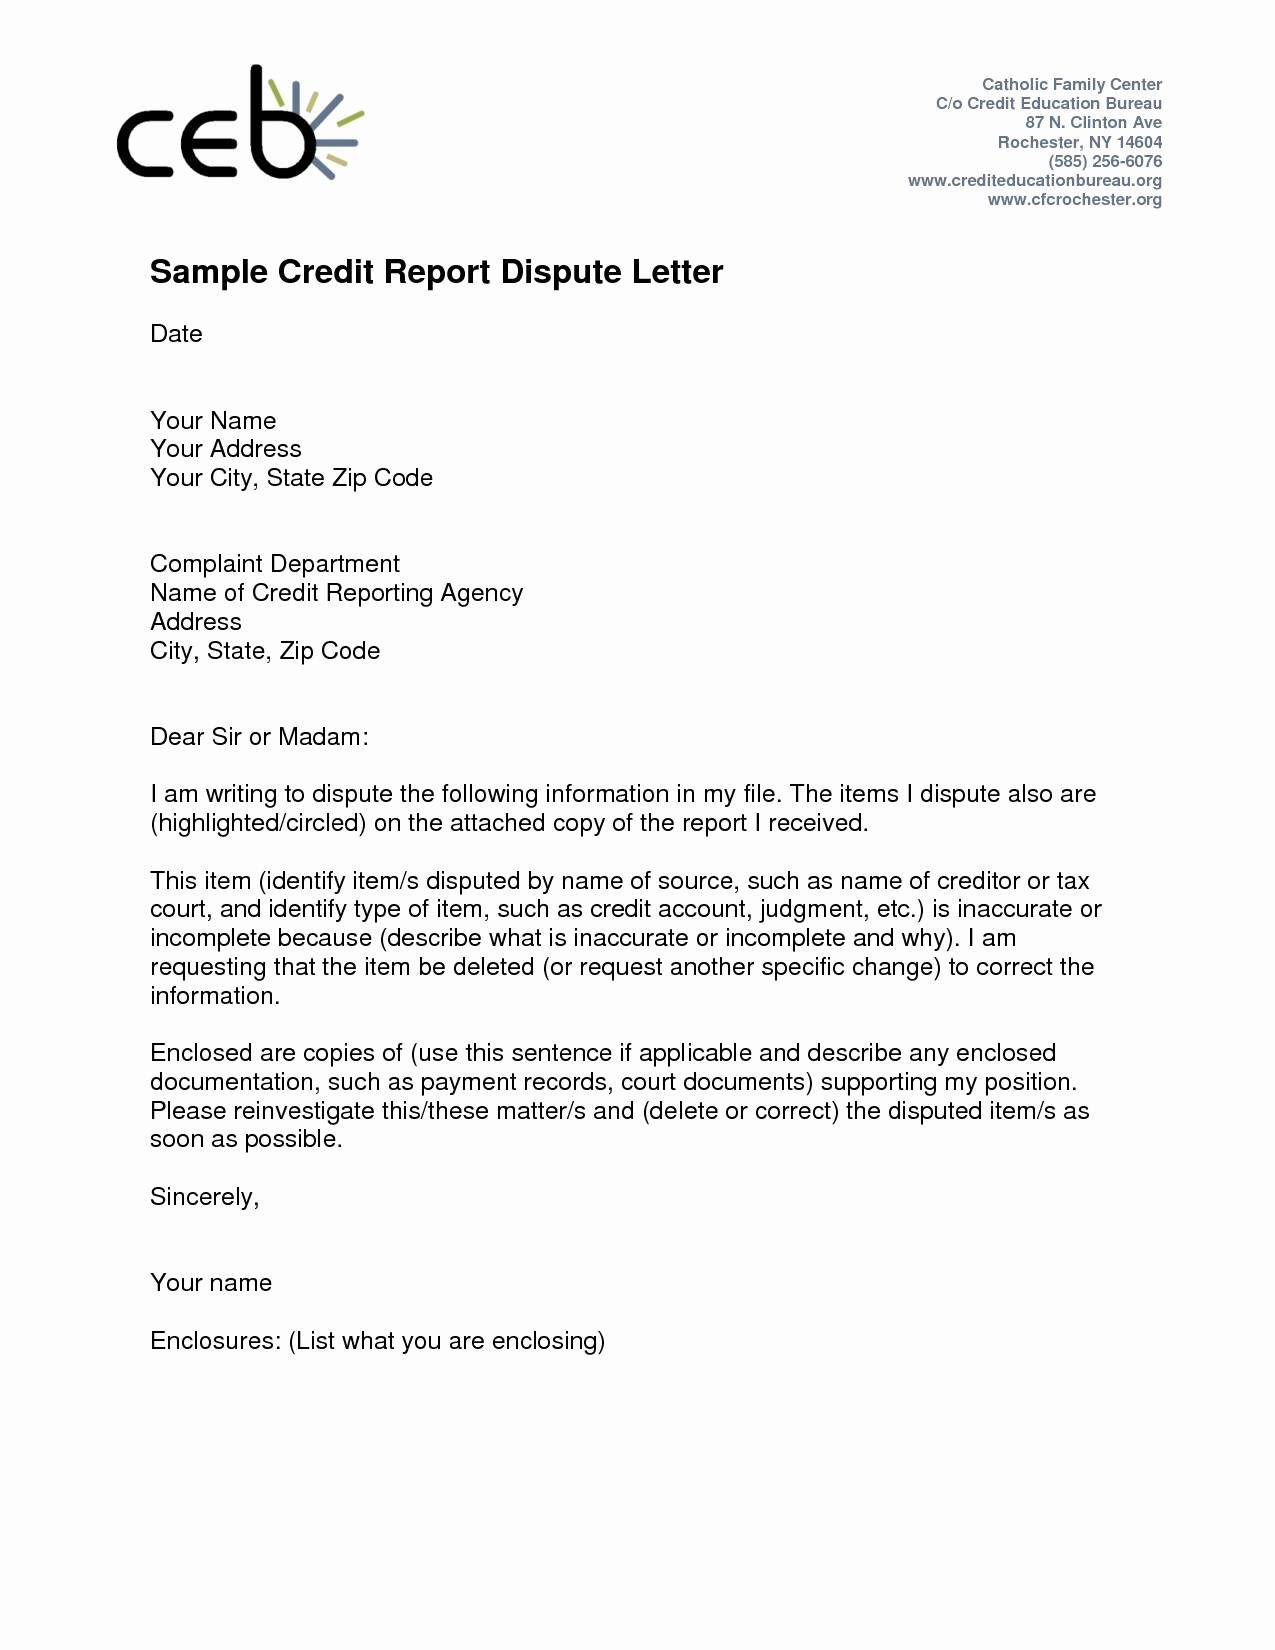 Credit Report Dispute Letter Template - Credit Report Dispute Letter Template Luxury 15 Best the Best Way to